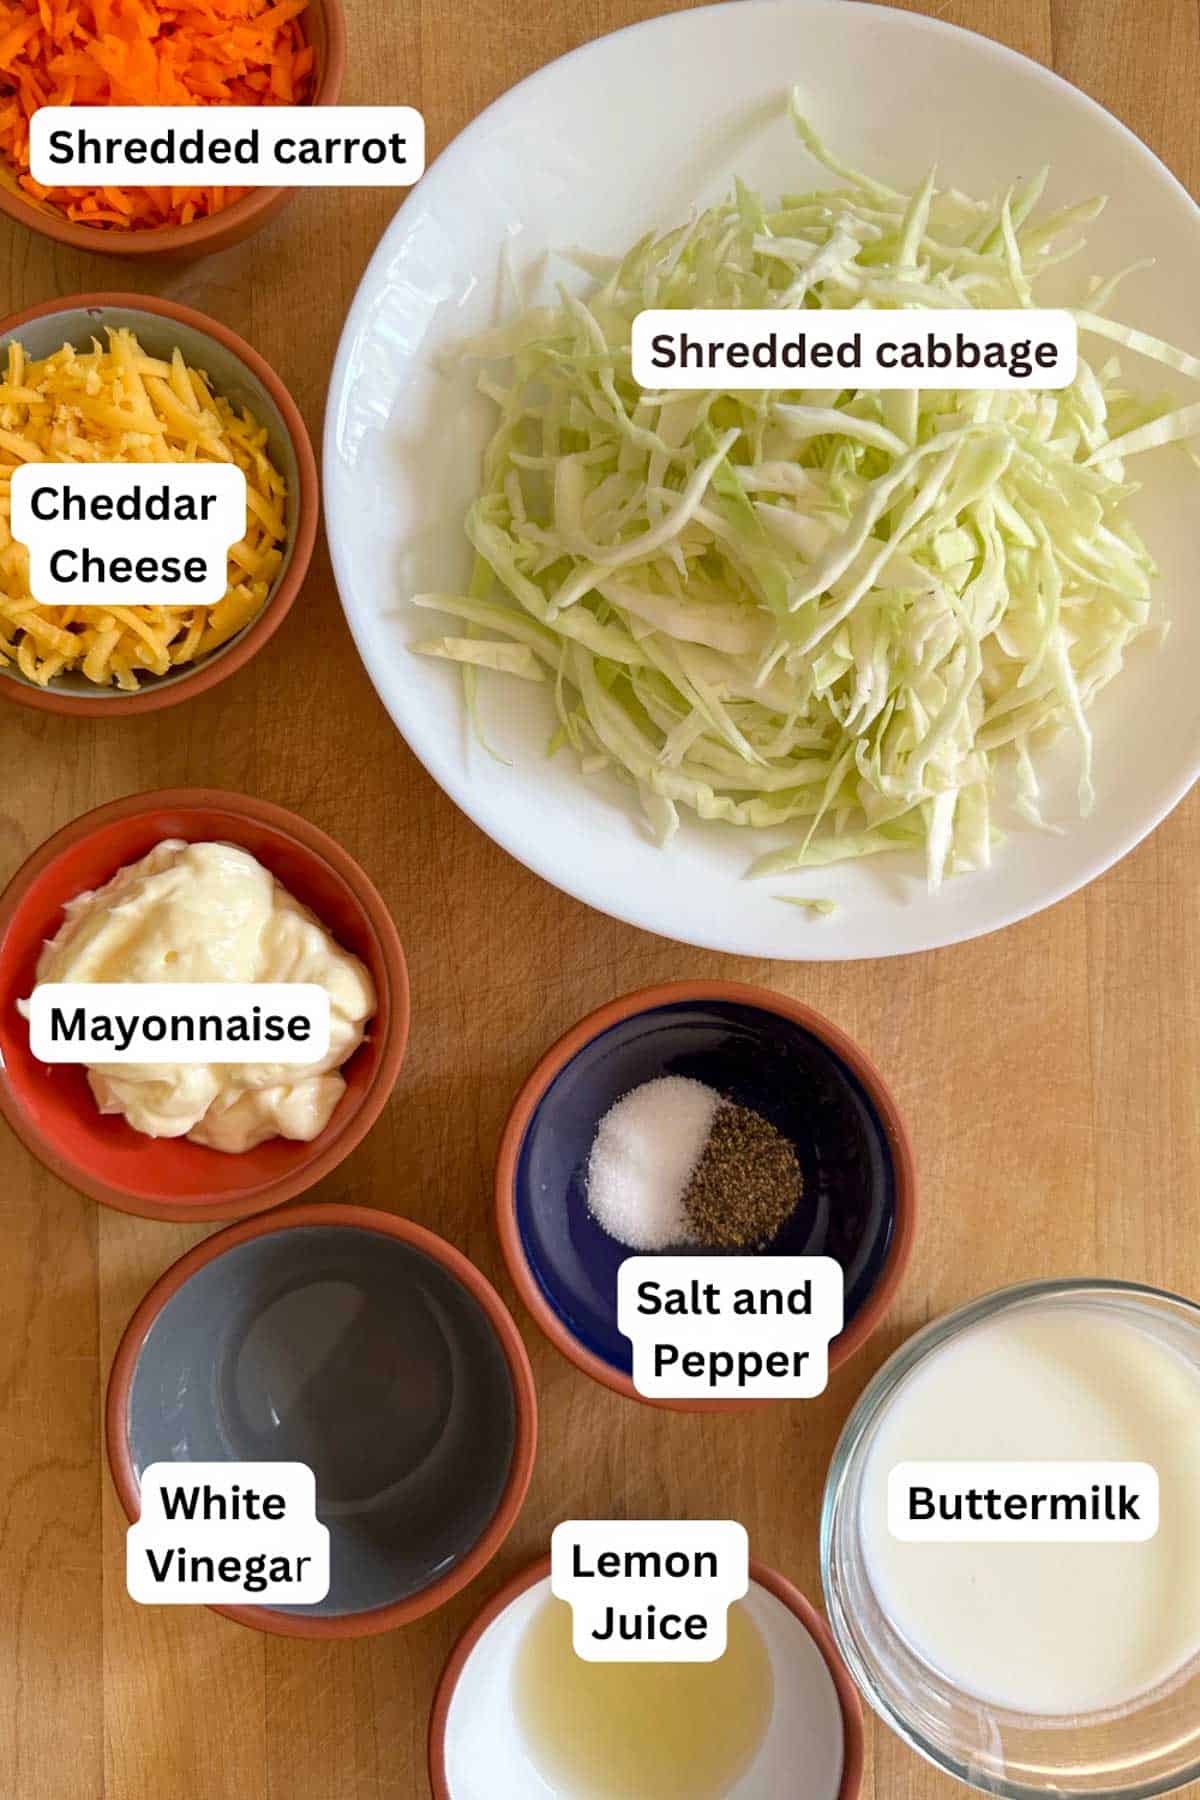 The ingredients needed for this coleslaw including shredded carrot and cabbage, cheddar cheese, mayonnaise, salt and pepper, white vinegar, lemon juice, and buttermilk.